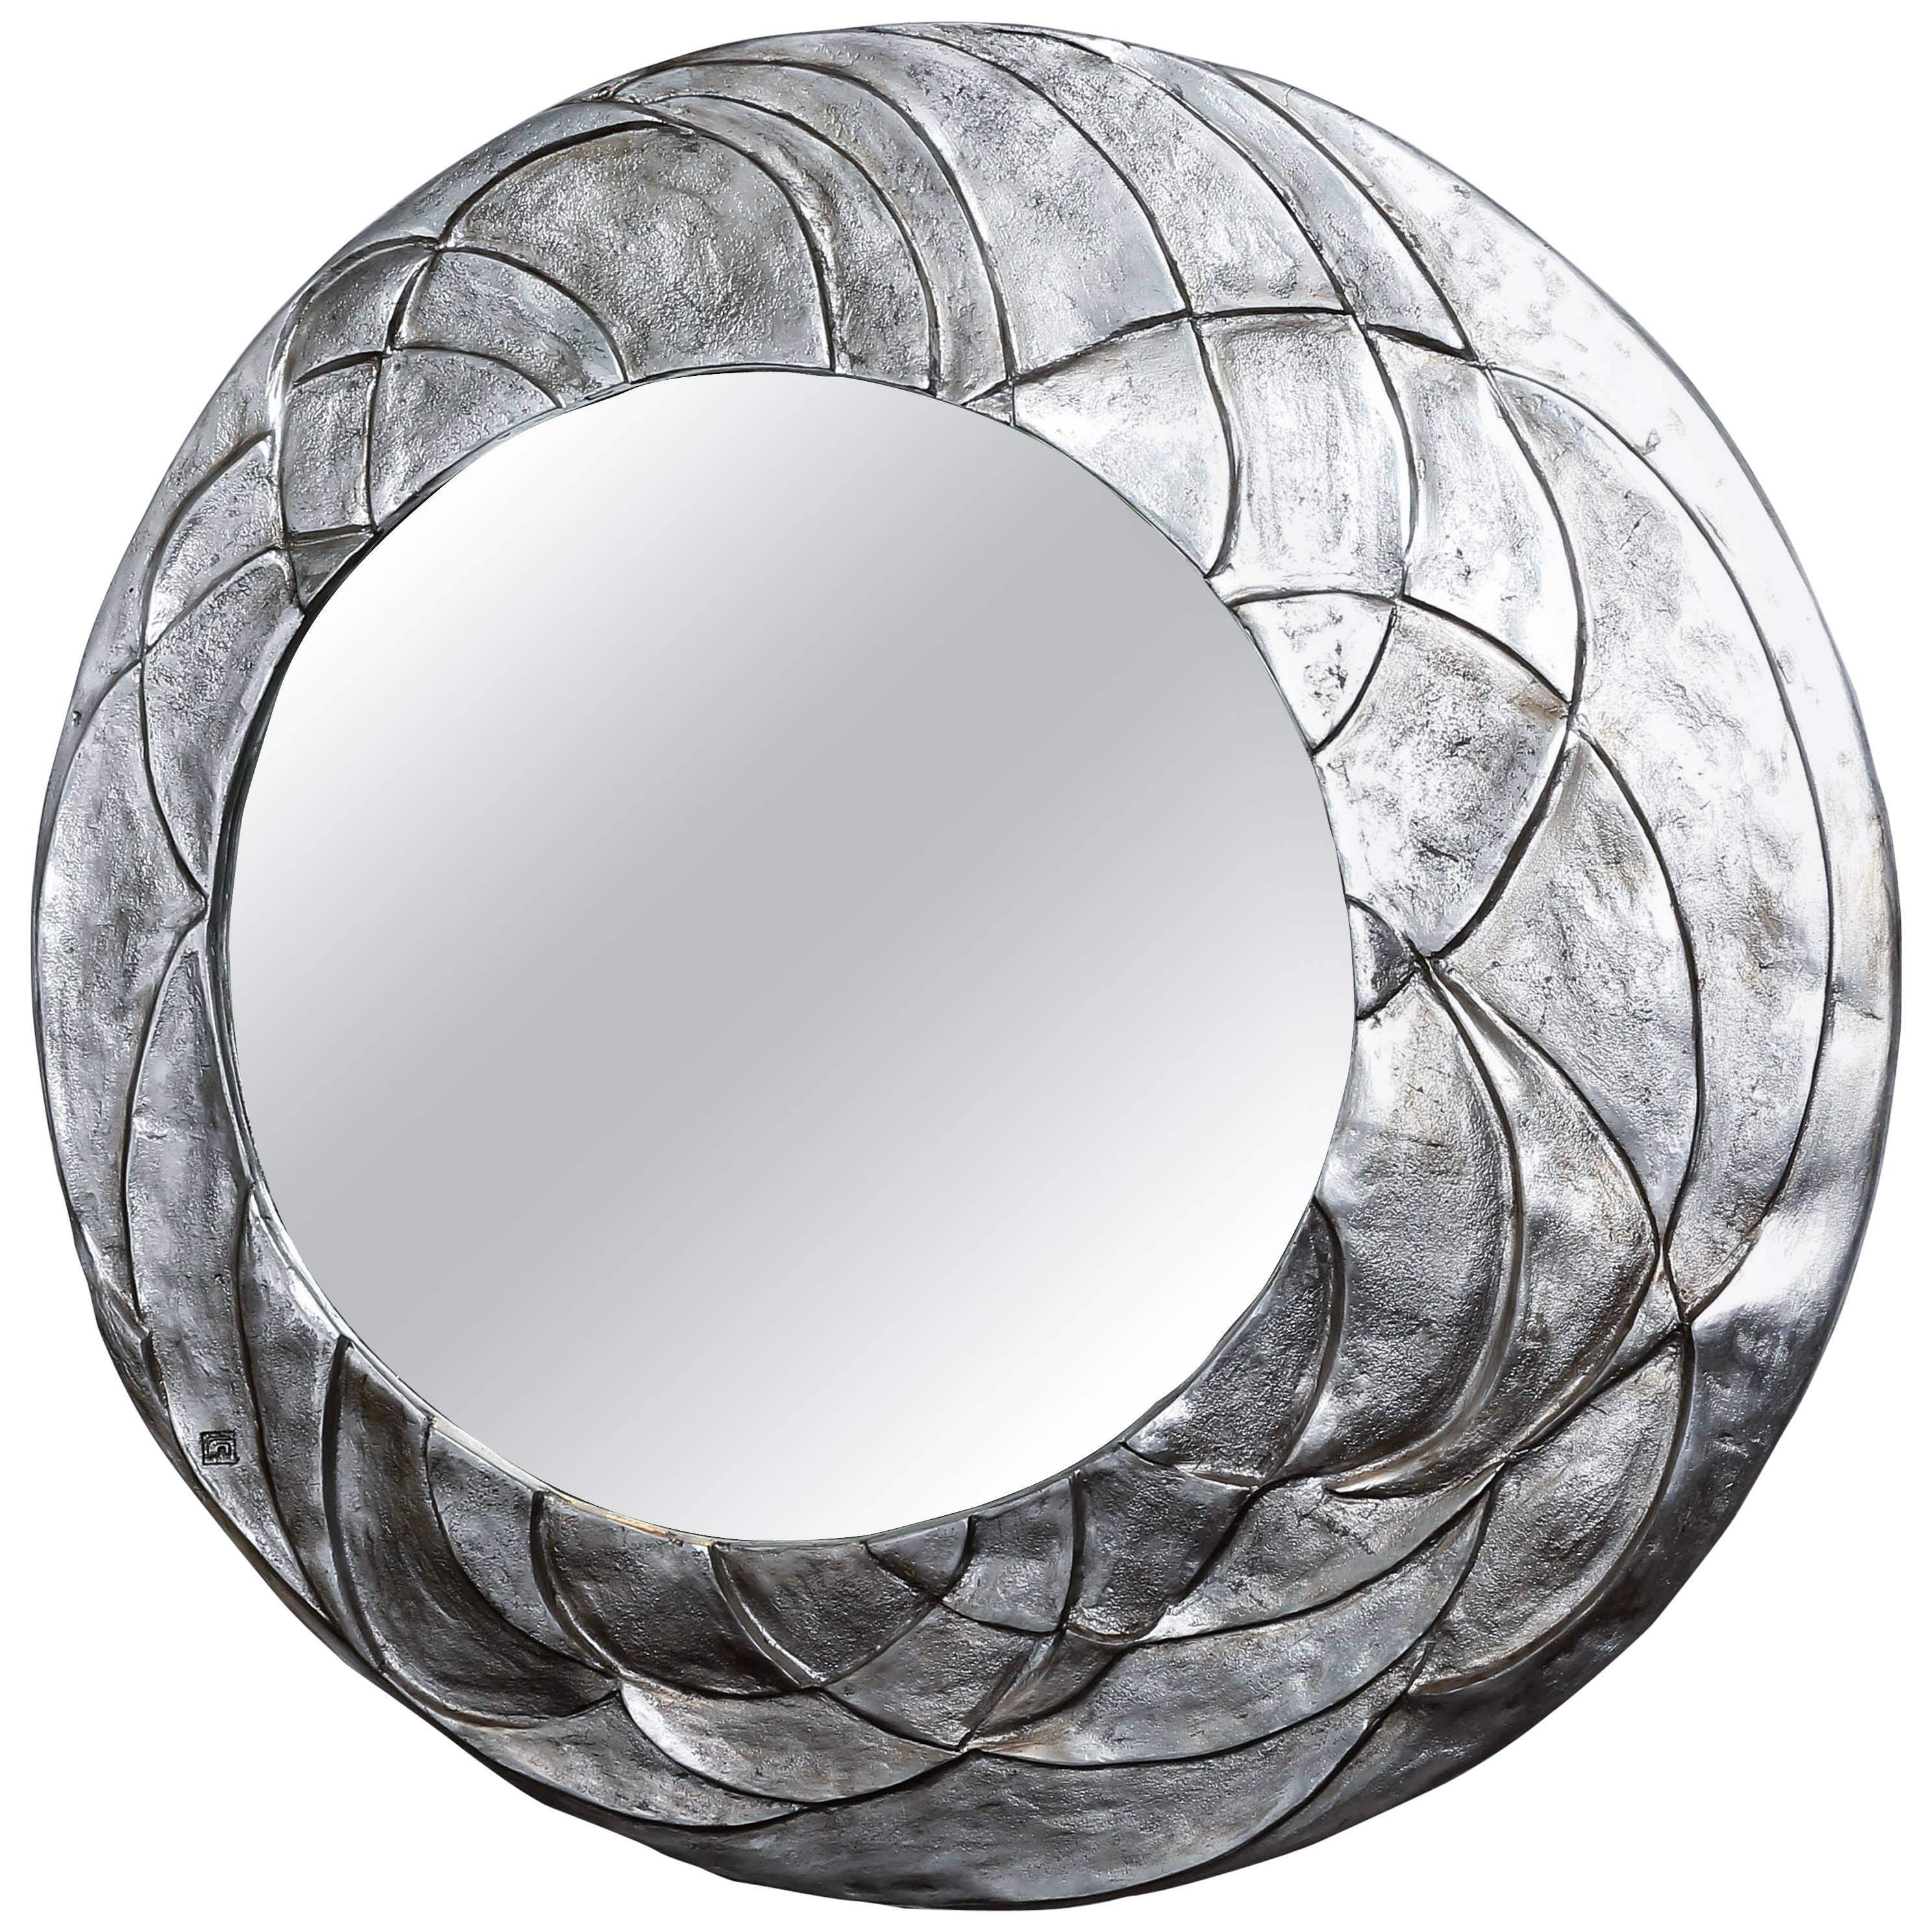 Asymetrical Ovoid Mirror with Textured Relief Aluminium Surround